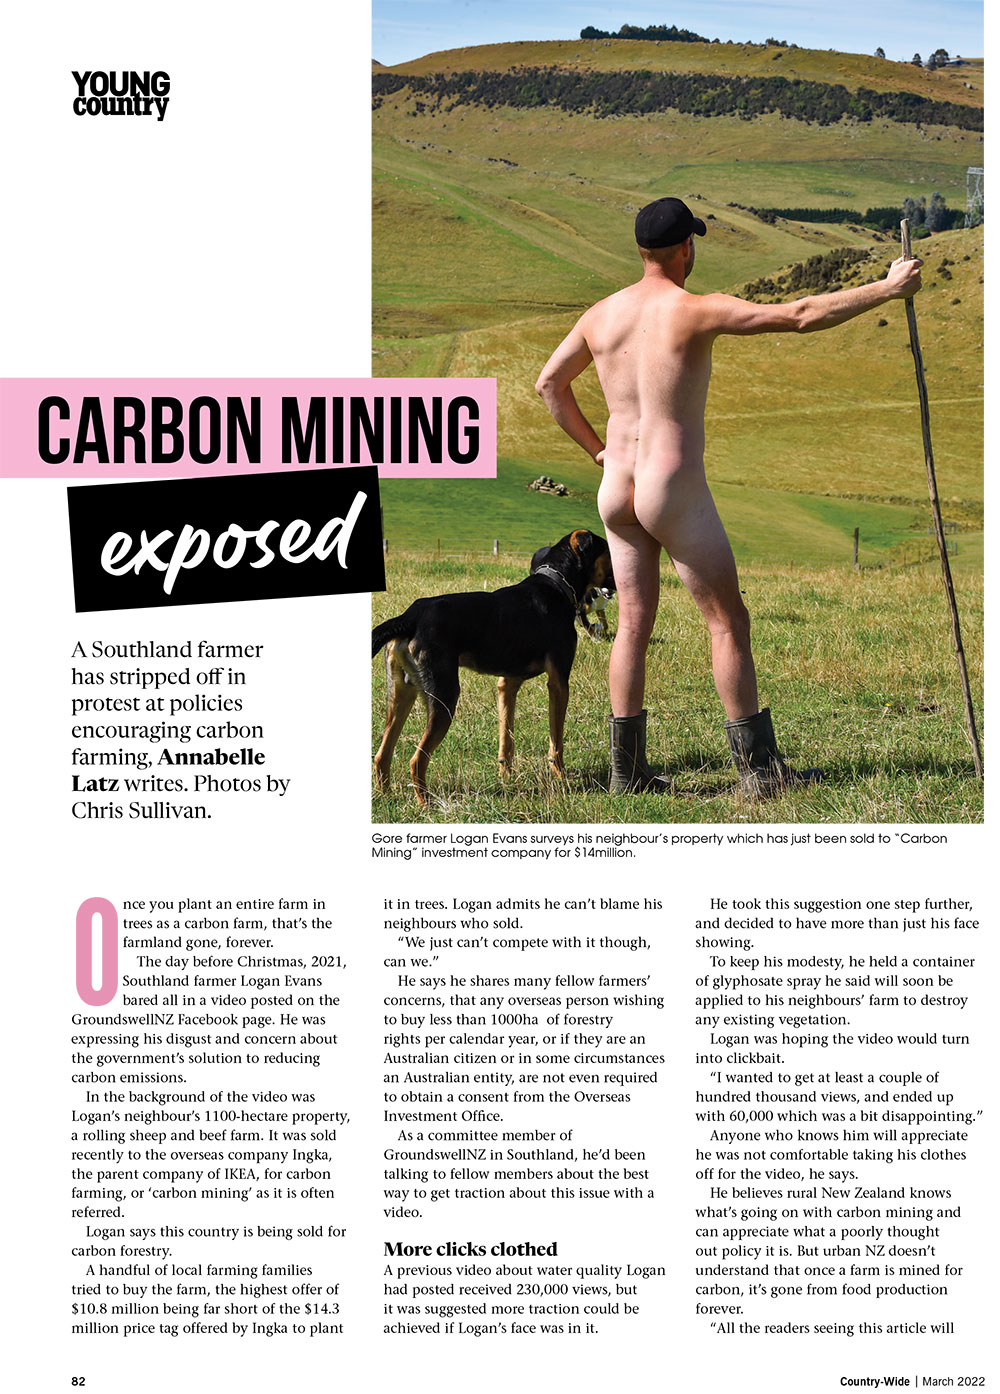 Carbon Mining Exposed, New Zealand | With Belles On